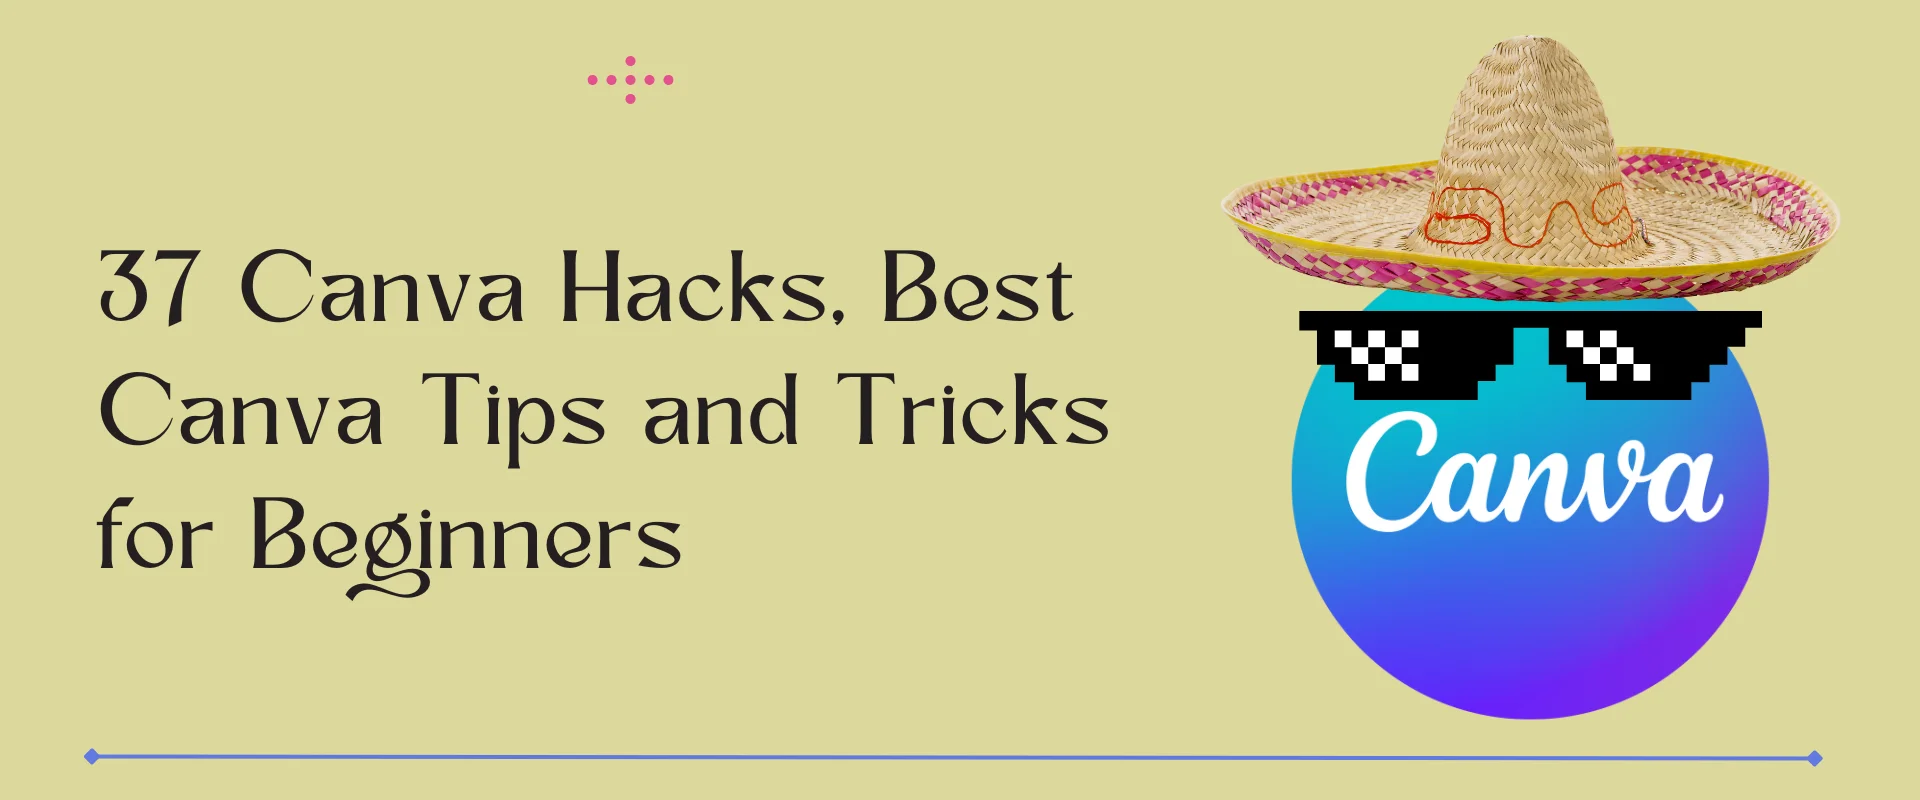 37 Canva Hacks, Best Canva Tips and Tricks for Beginners